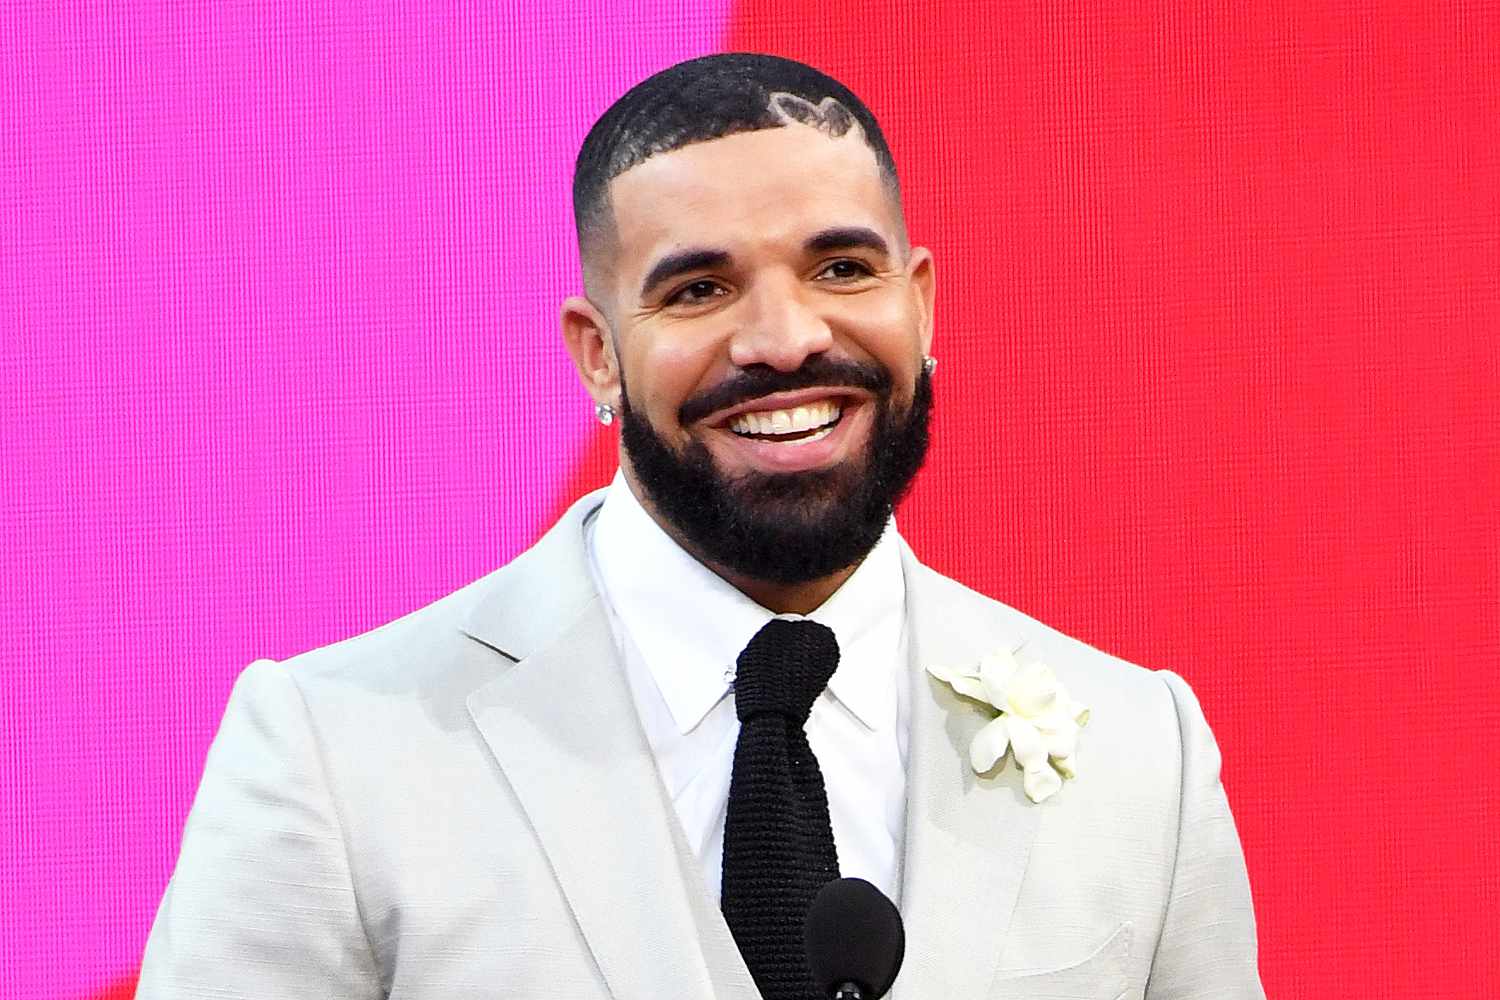 Drake, winner of the Artist of the Decade Award, and Adonis Graham speak onstage for the 2021 Billboard Music Awards, broadcast on May 23, 2021 at Microsoft Theater in Los Angeles, California.